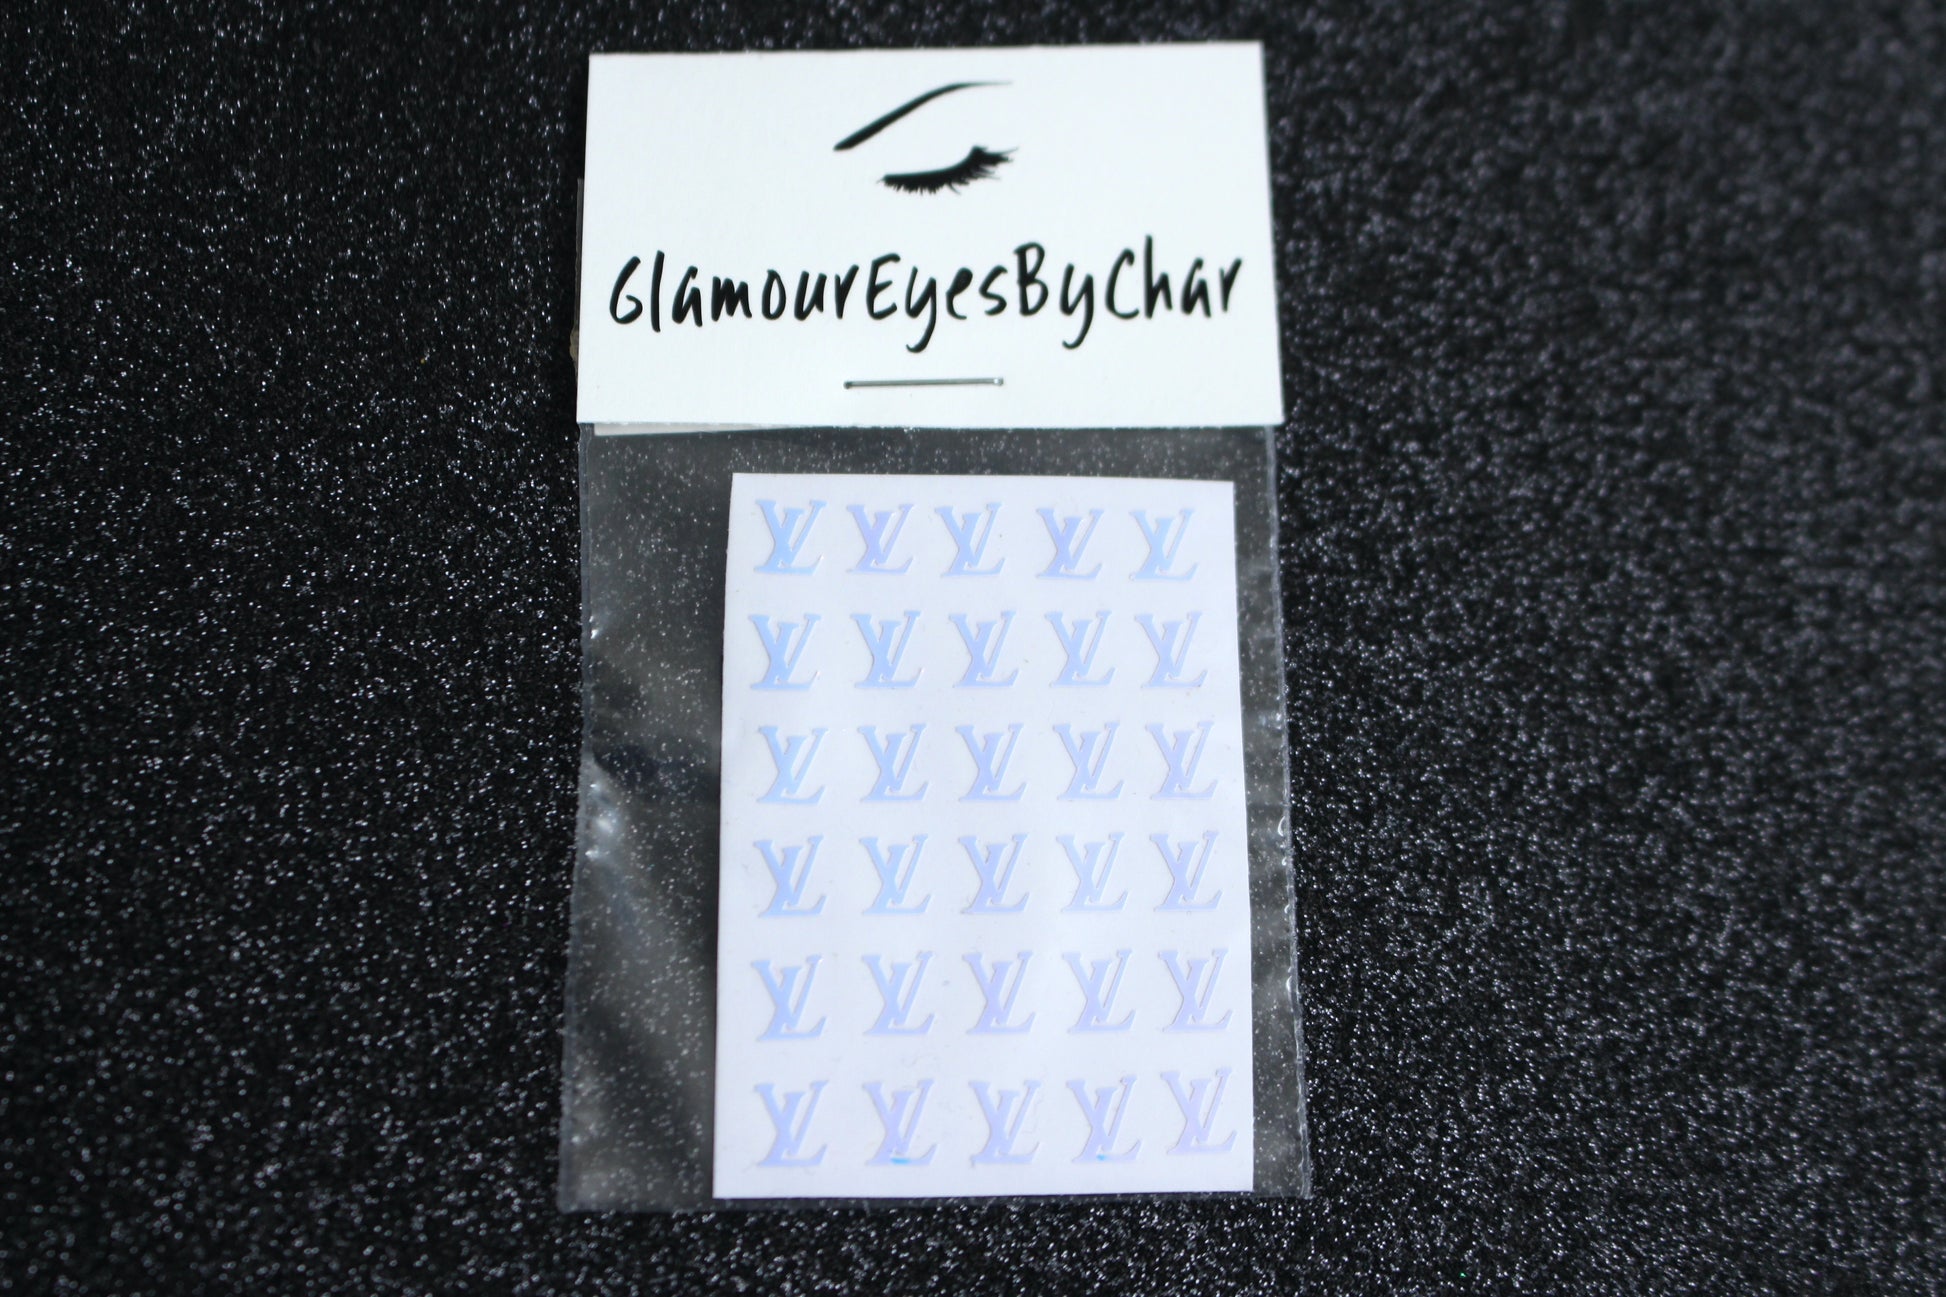 LV NAIL ART STICKER - SILVER HOLOGRAPHIC